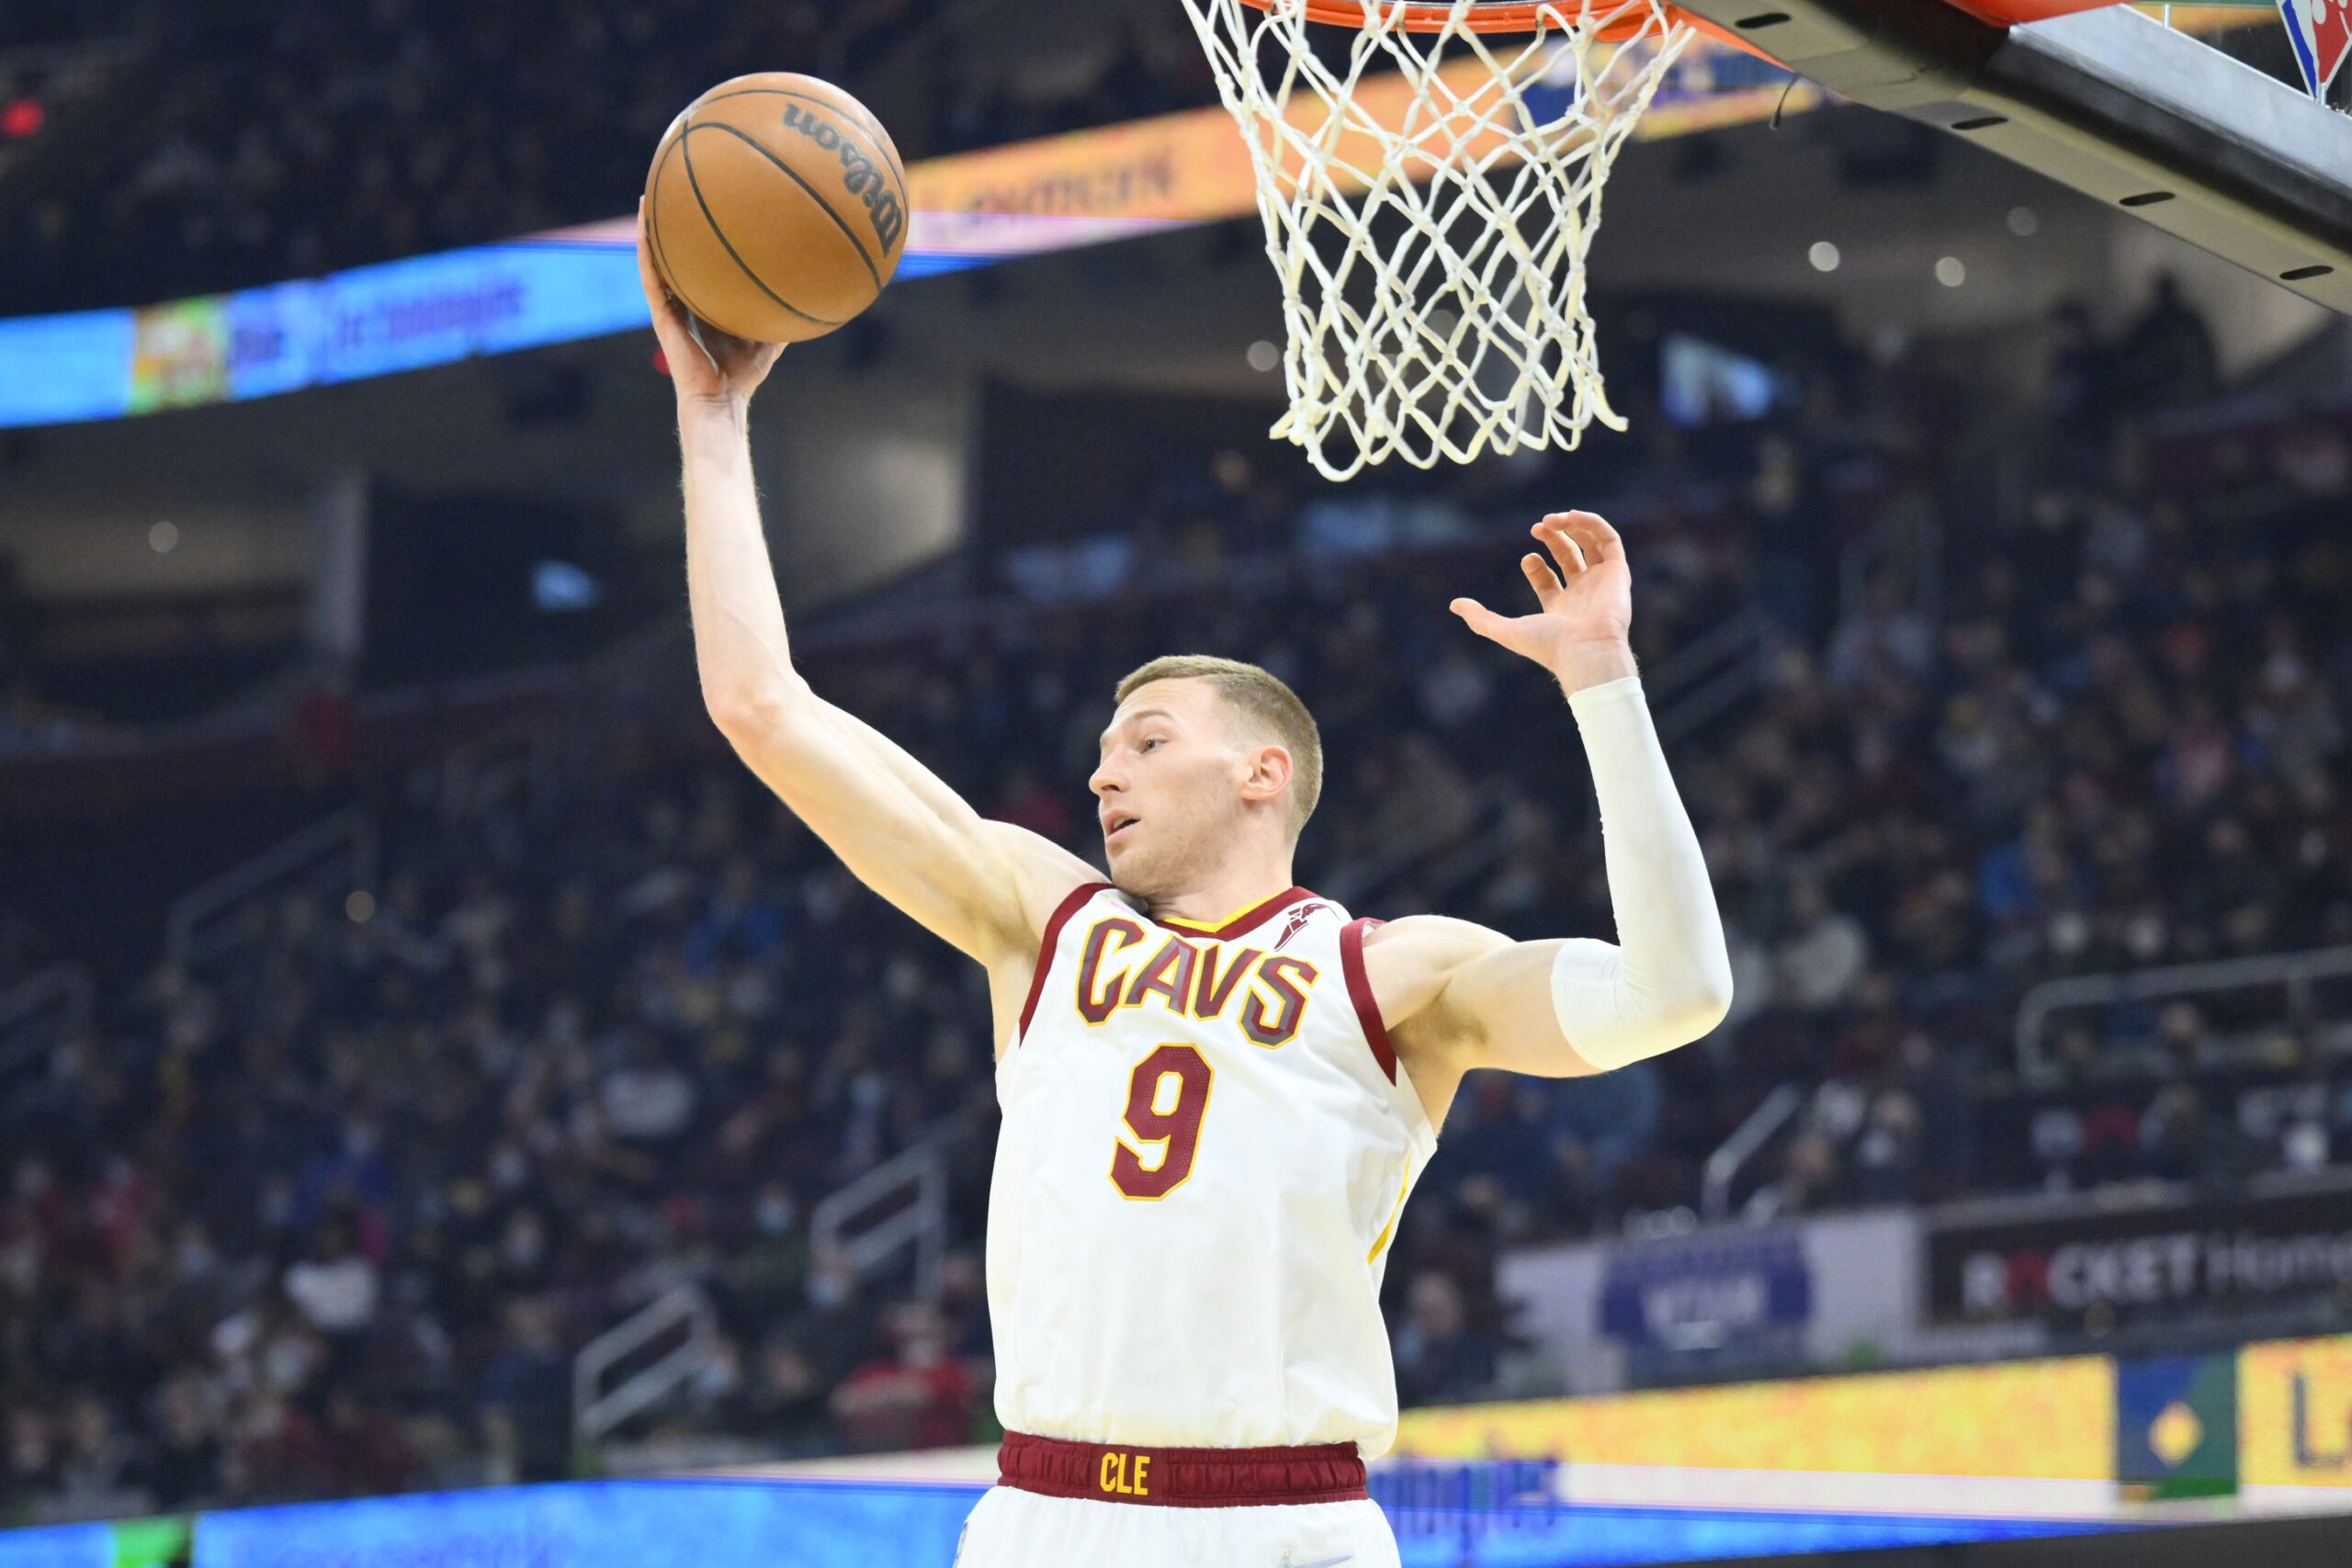 Jan 24, 2022; Cleveland, Ohio, USA; Cleveland Cavaliers guard Dylan Windler (9) rebounds in the second quarter against the New York Knicks at Rocket Mortgage FieldHouse. Mandatory Credit: David Richard-USA TODAY Sports